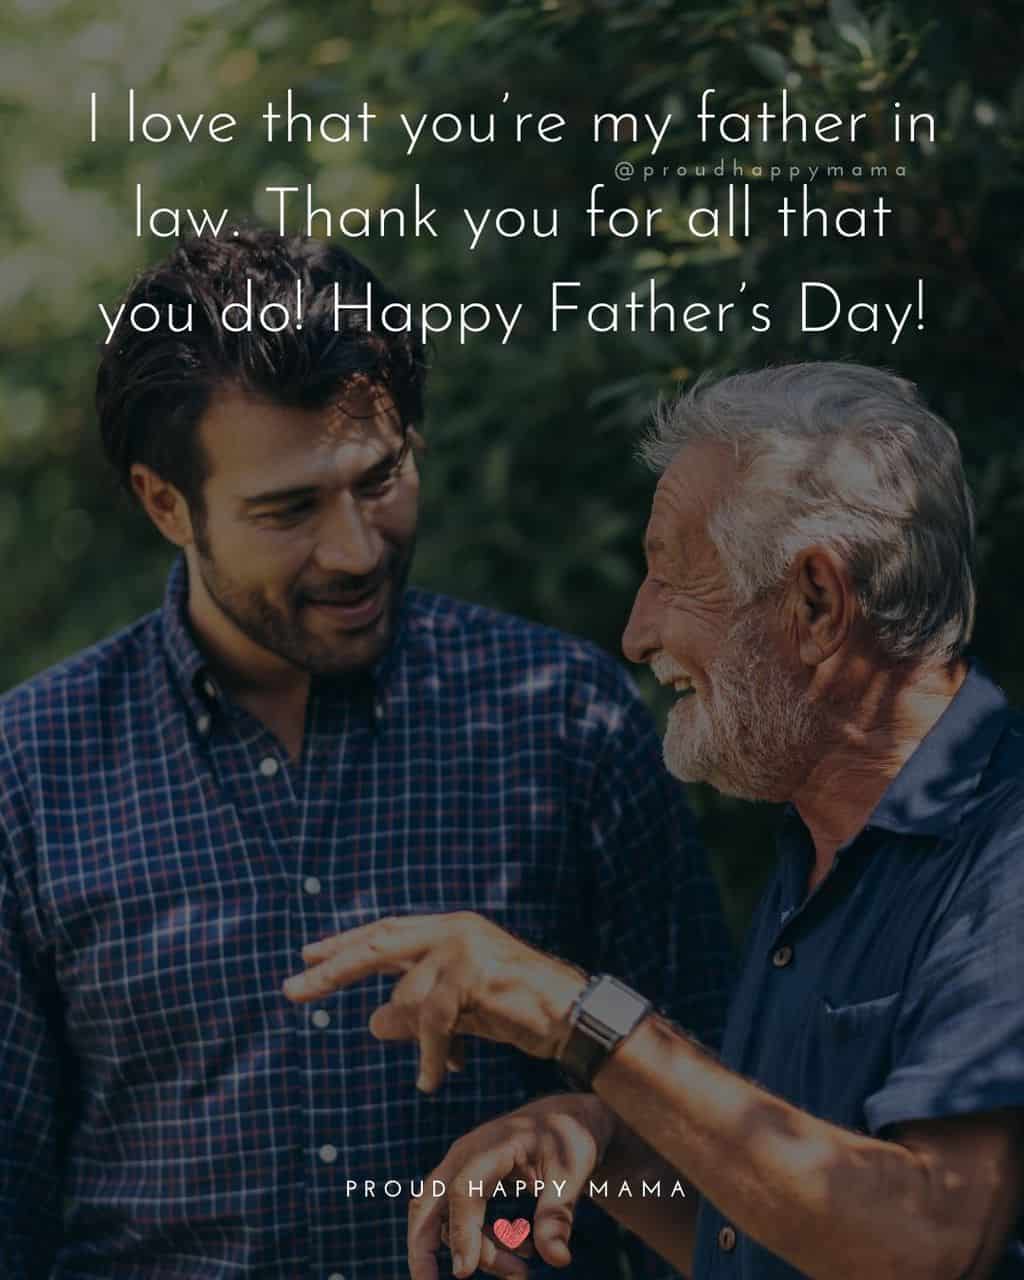 Happy Fathers Day Quotes For Father In Law - I love that you’re my father in law. Thank you for all that you do! Happy Father’s